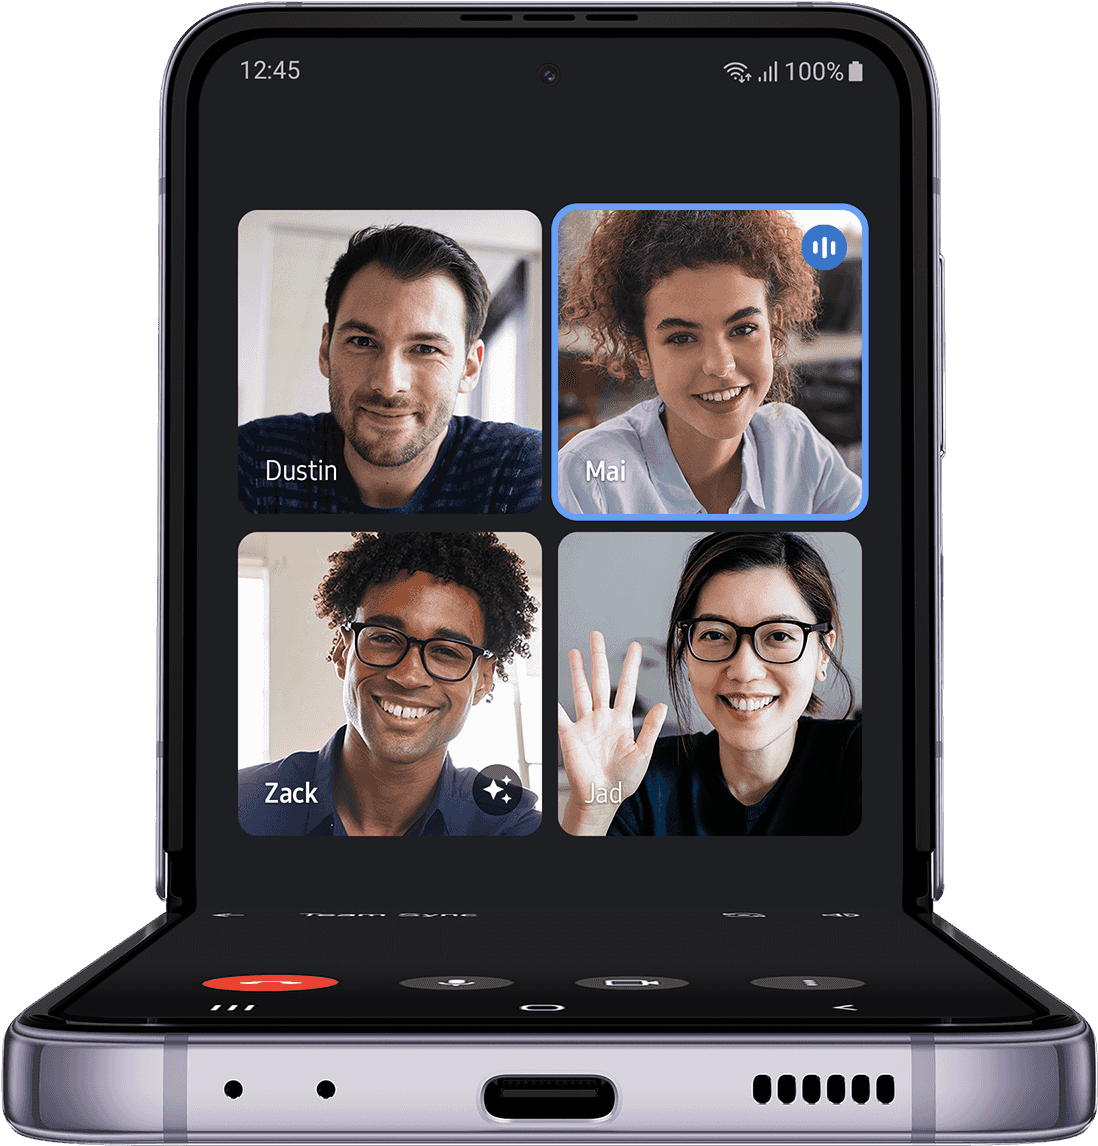 Galaxy Z Flip4 in FlexCam
	mode shows a video call with four participants on the Main Screen.